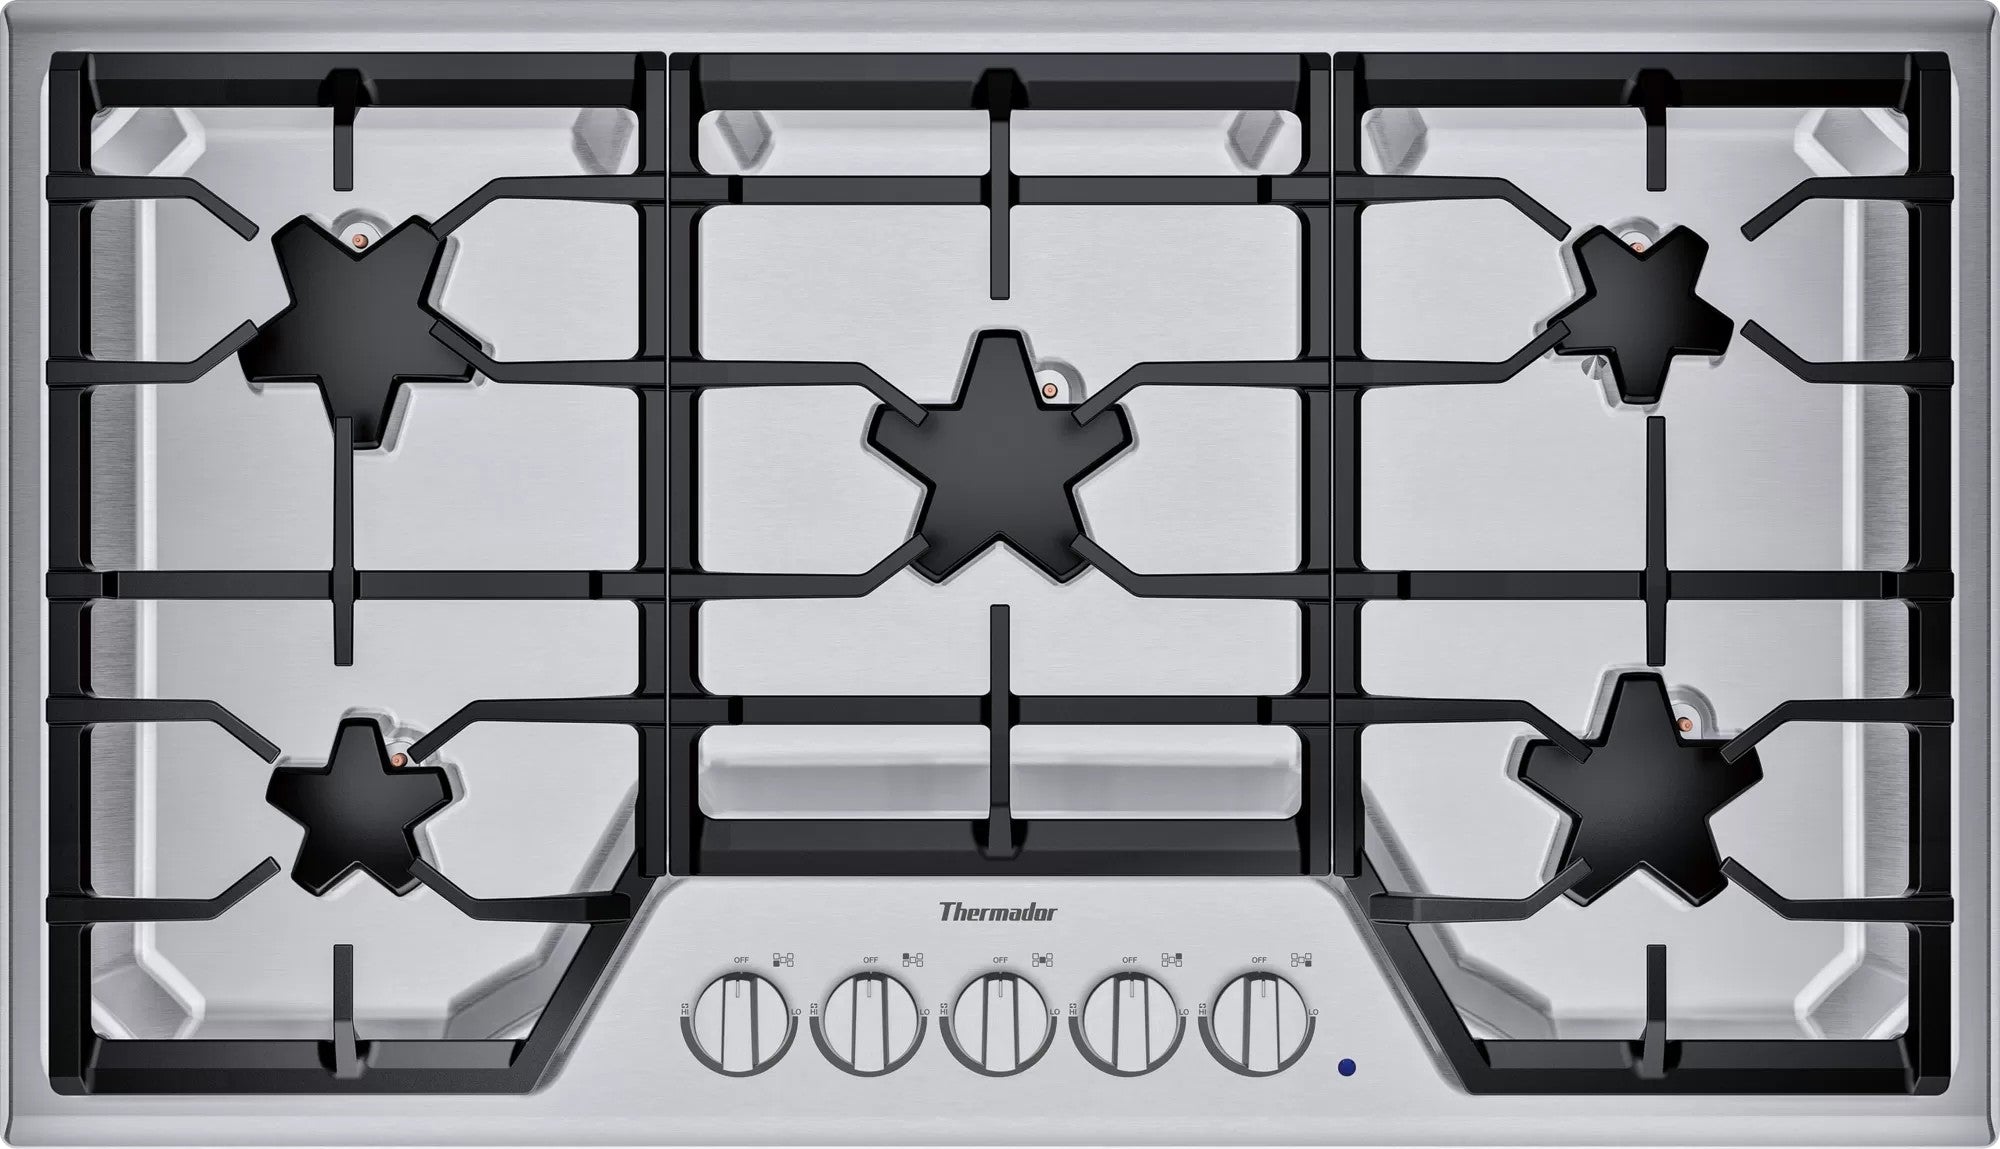 Thermador - 37 Inch Gas Cooktop in Stainless - SGS365TS